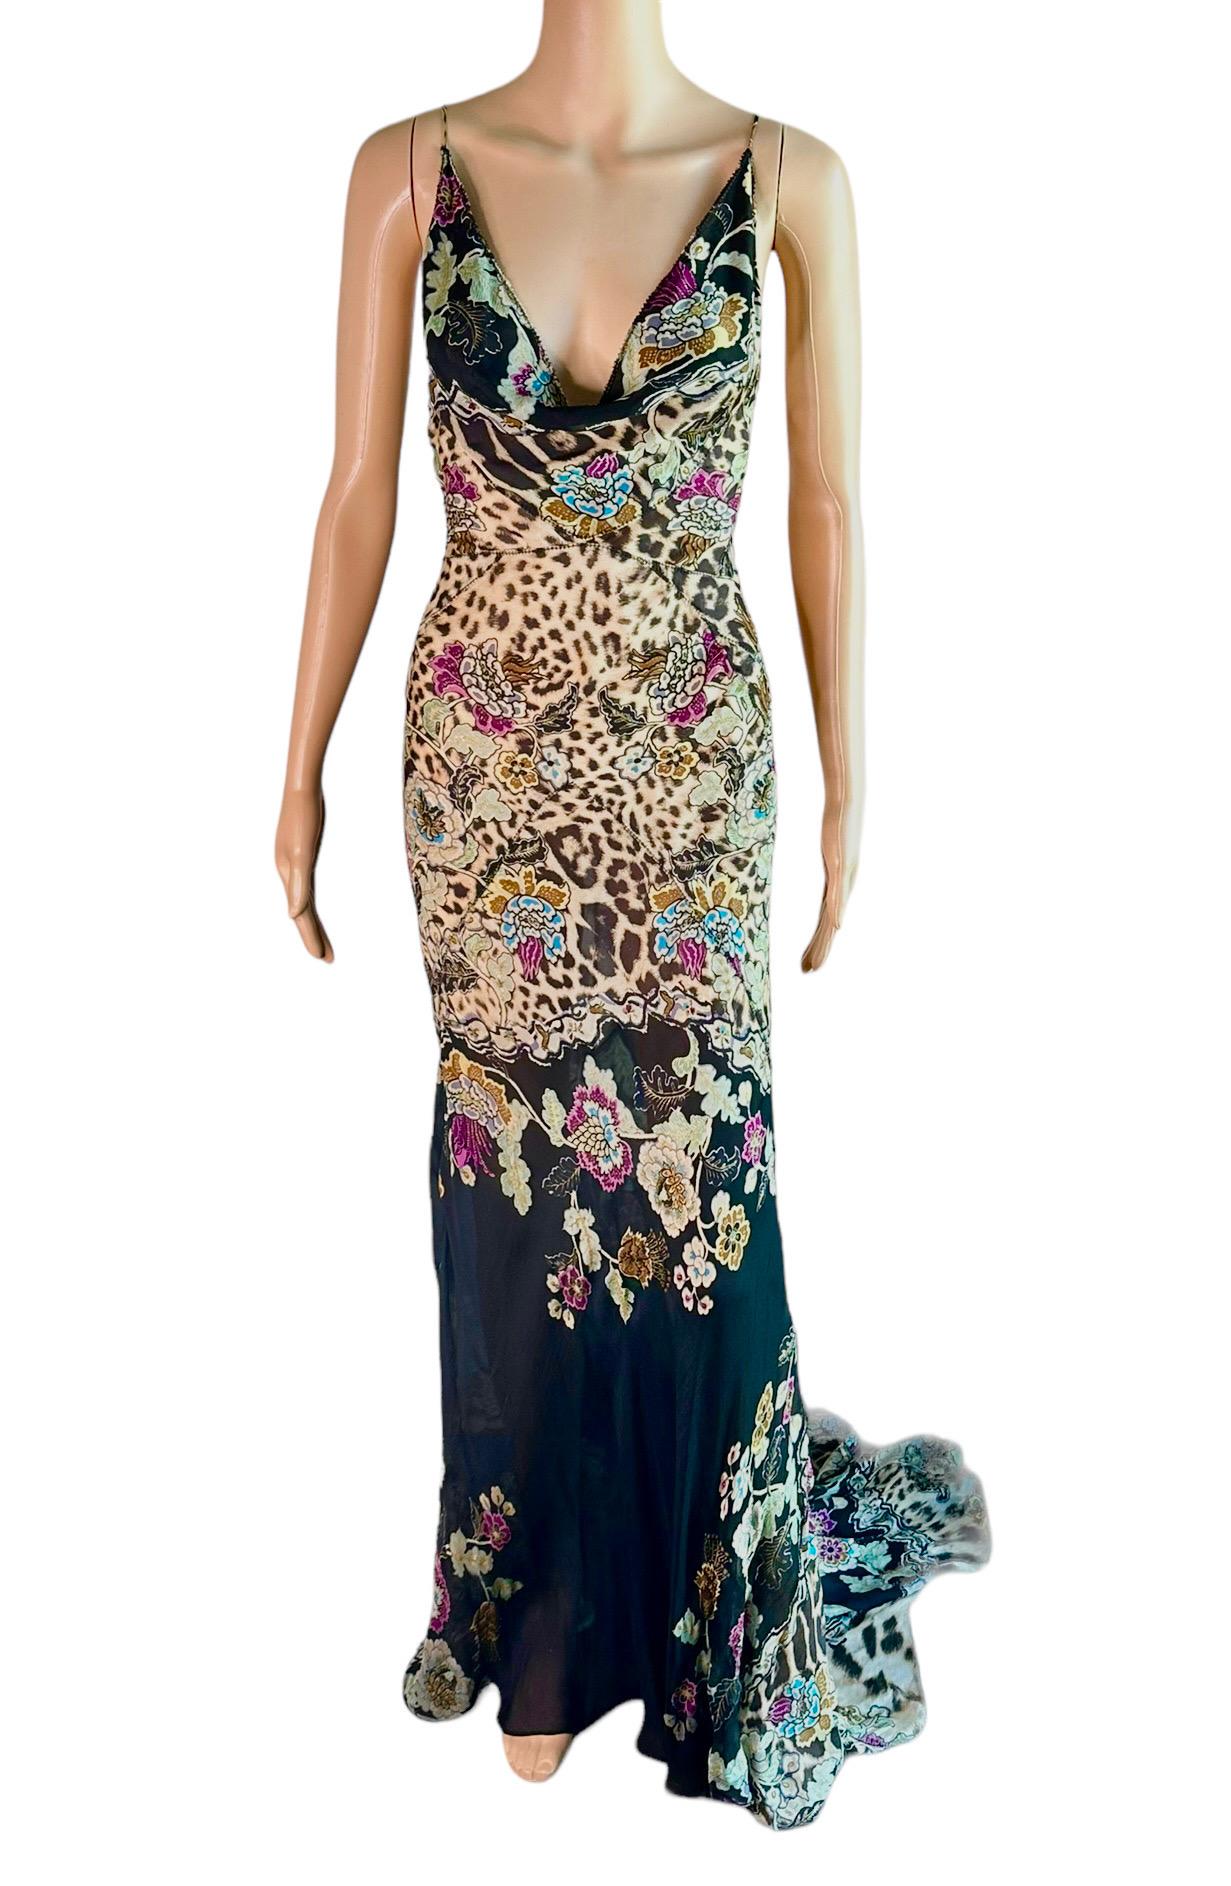 Roberto Cavalli S/S 2003 Chinoiserie Print Silk Train Maxi Evening Dress Gown For Sale 4